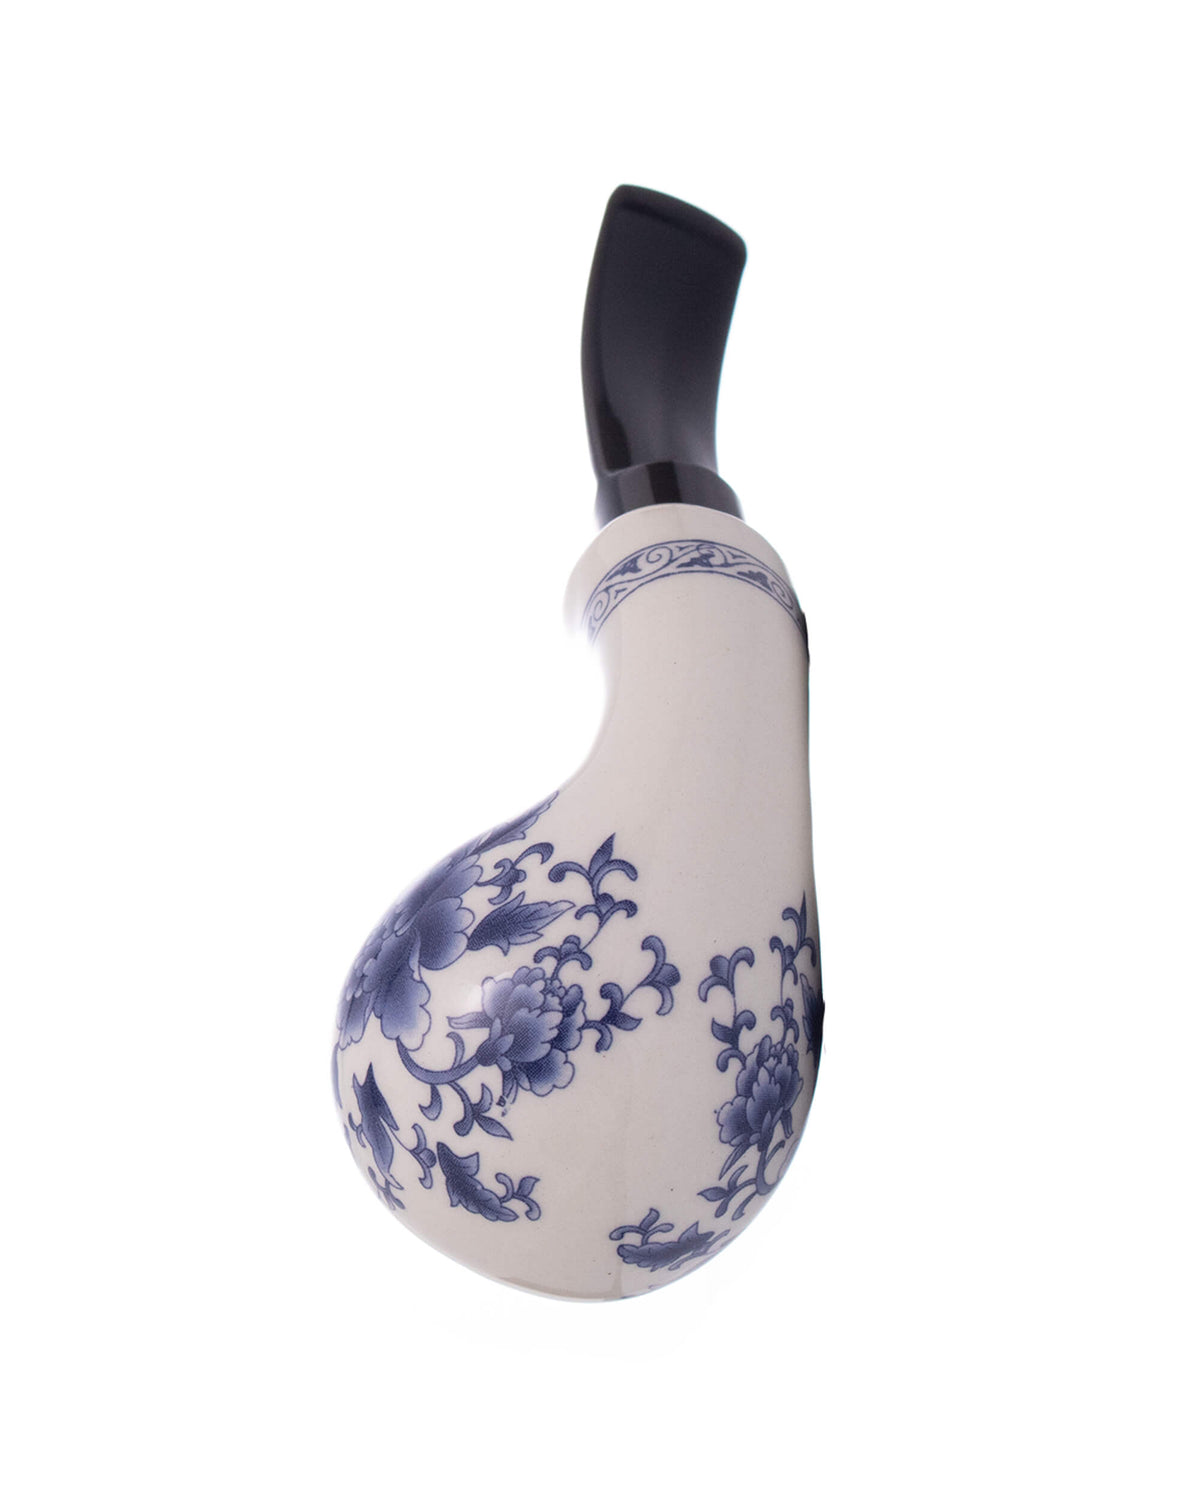 JOY Ceramic Pipe with Stand